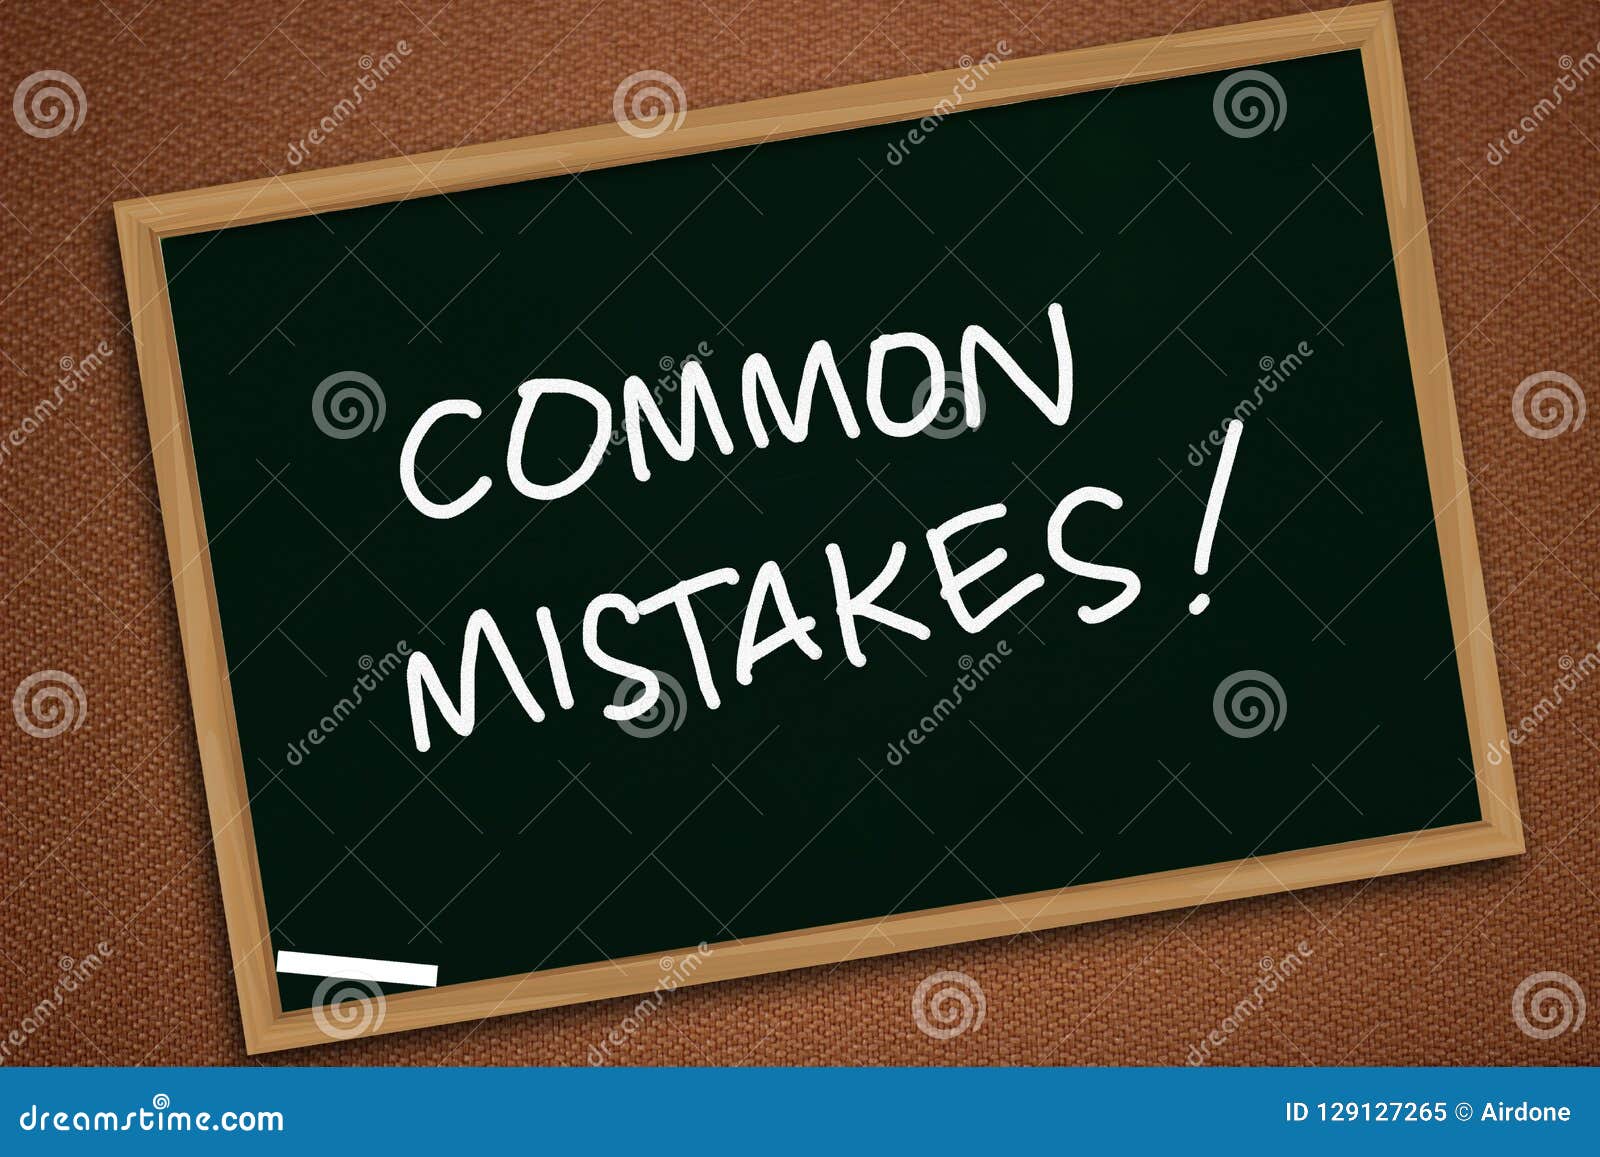 common mistakes, motivational words quotes concept